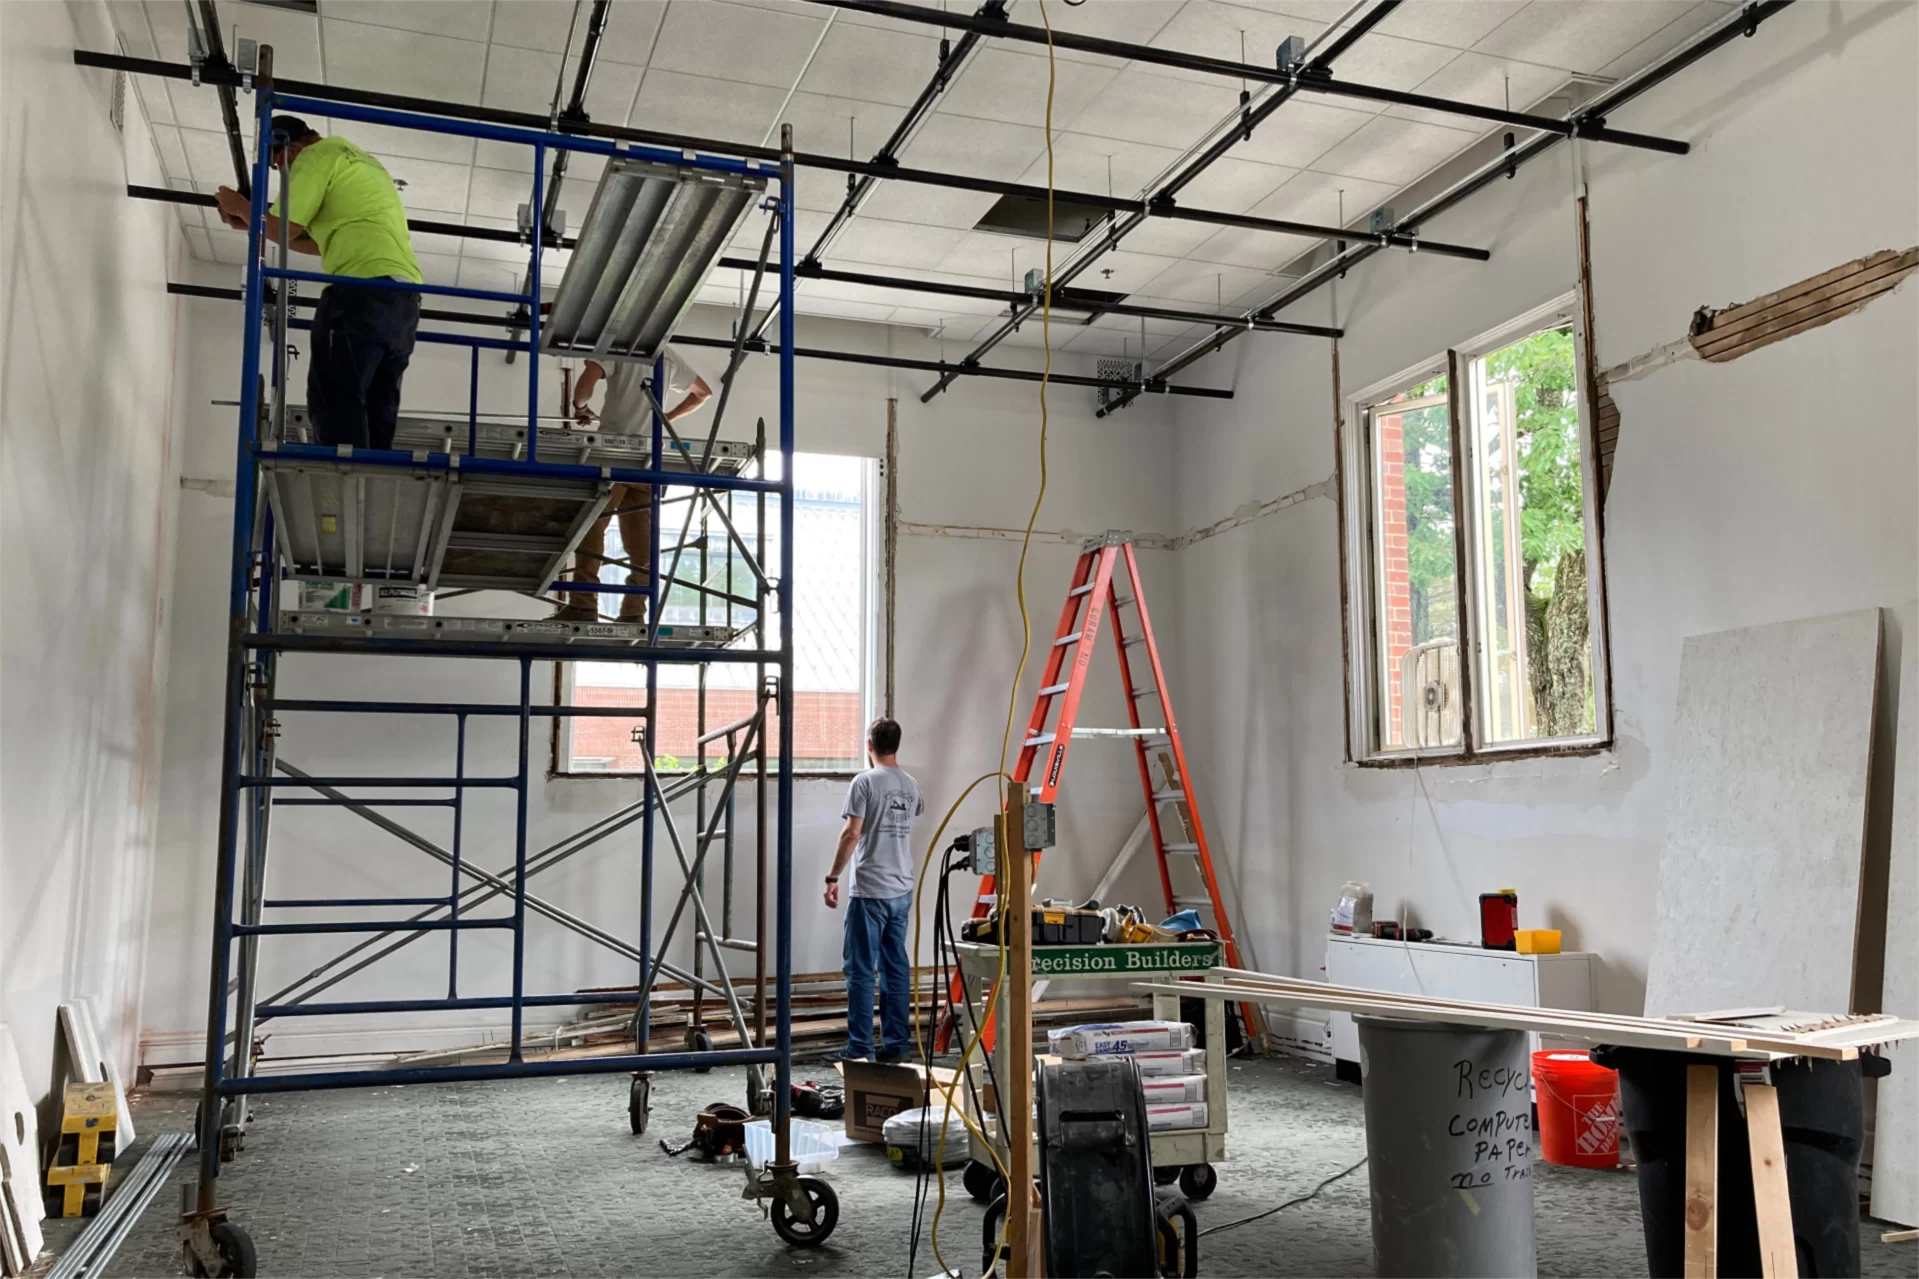 On the staging, electricians make connections on the ceiling grid that will support imaging and sound equipment when the conversion of Coram 110 into an immersive media studio is complete. At floor level is a carpenter. (Doug Hubley/Bates College)